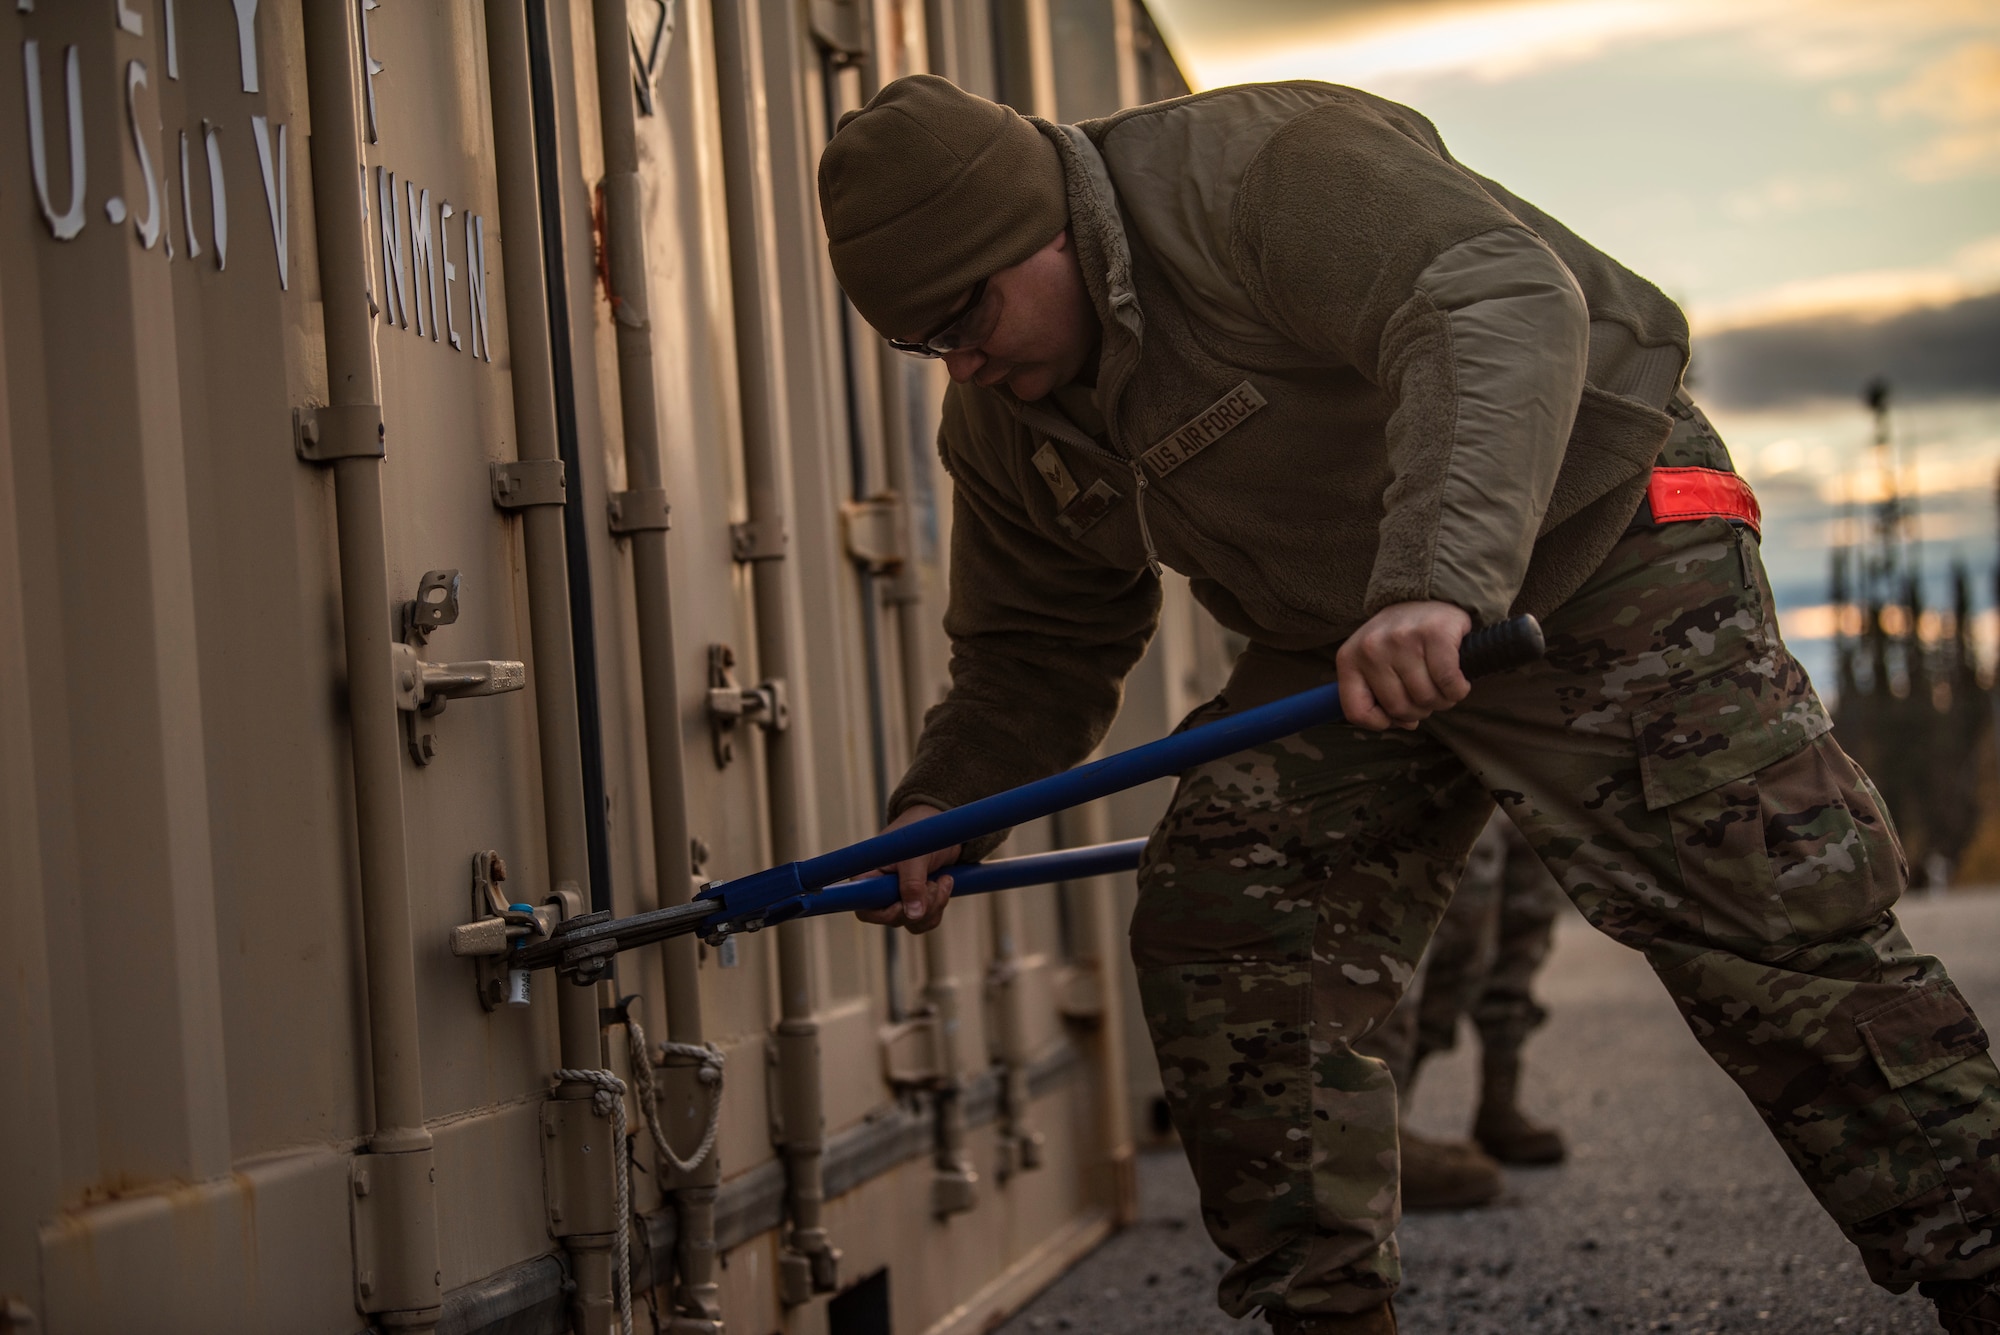 The munitions barge is a task conducted biannually by the 354th MUNS that receives, inspects and stores munitions.